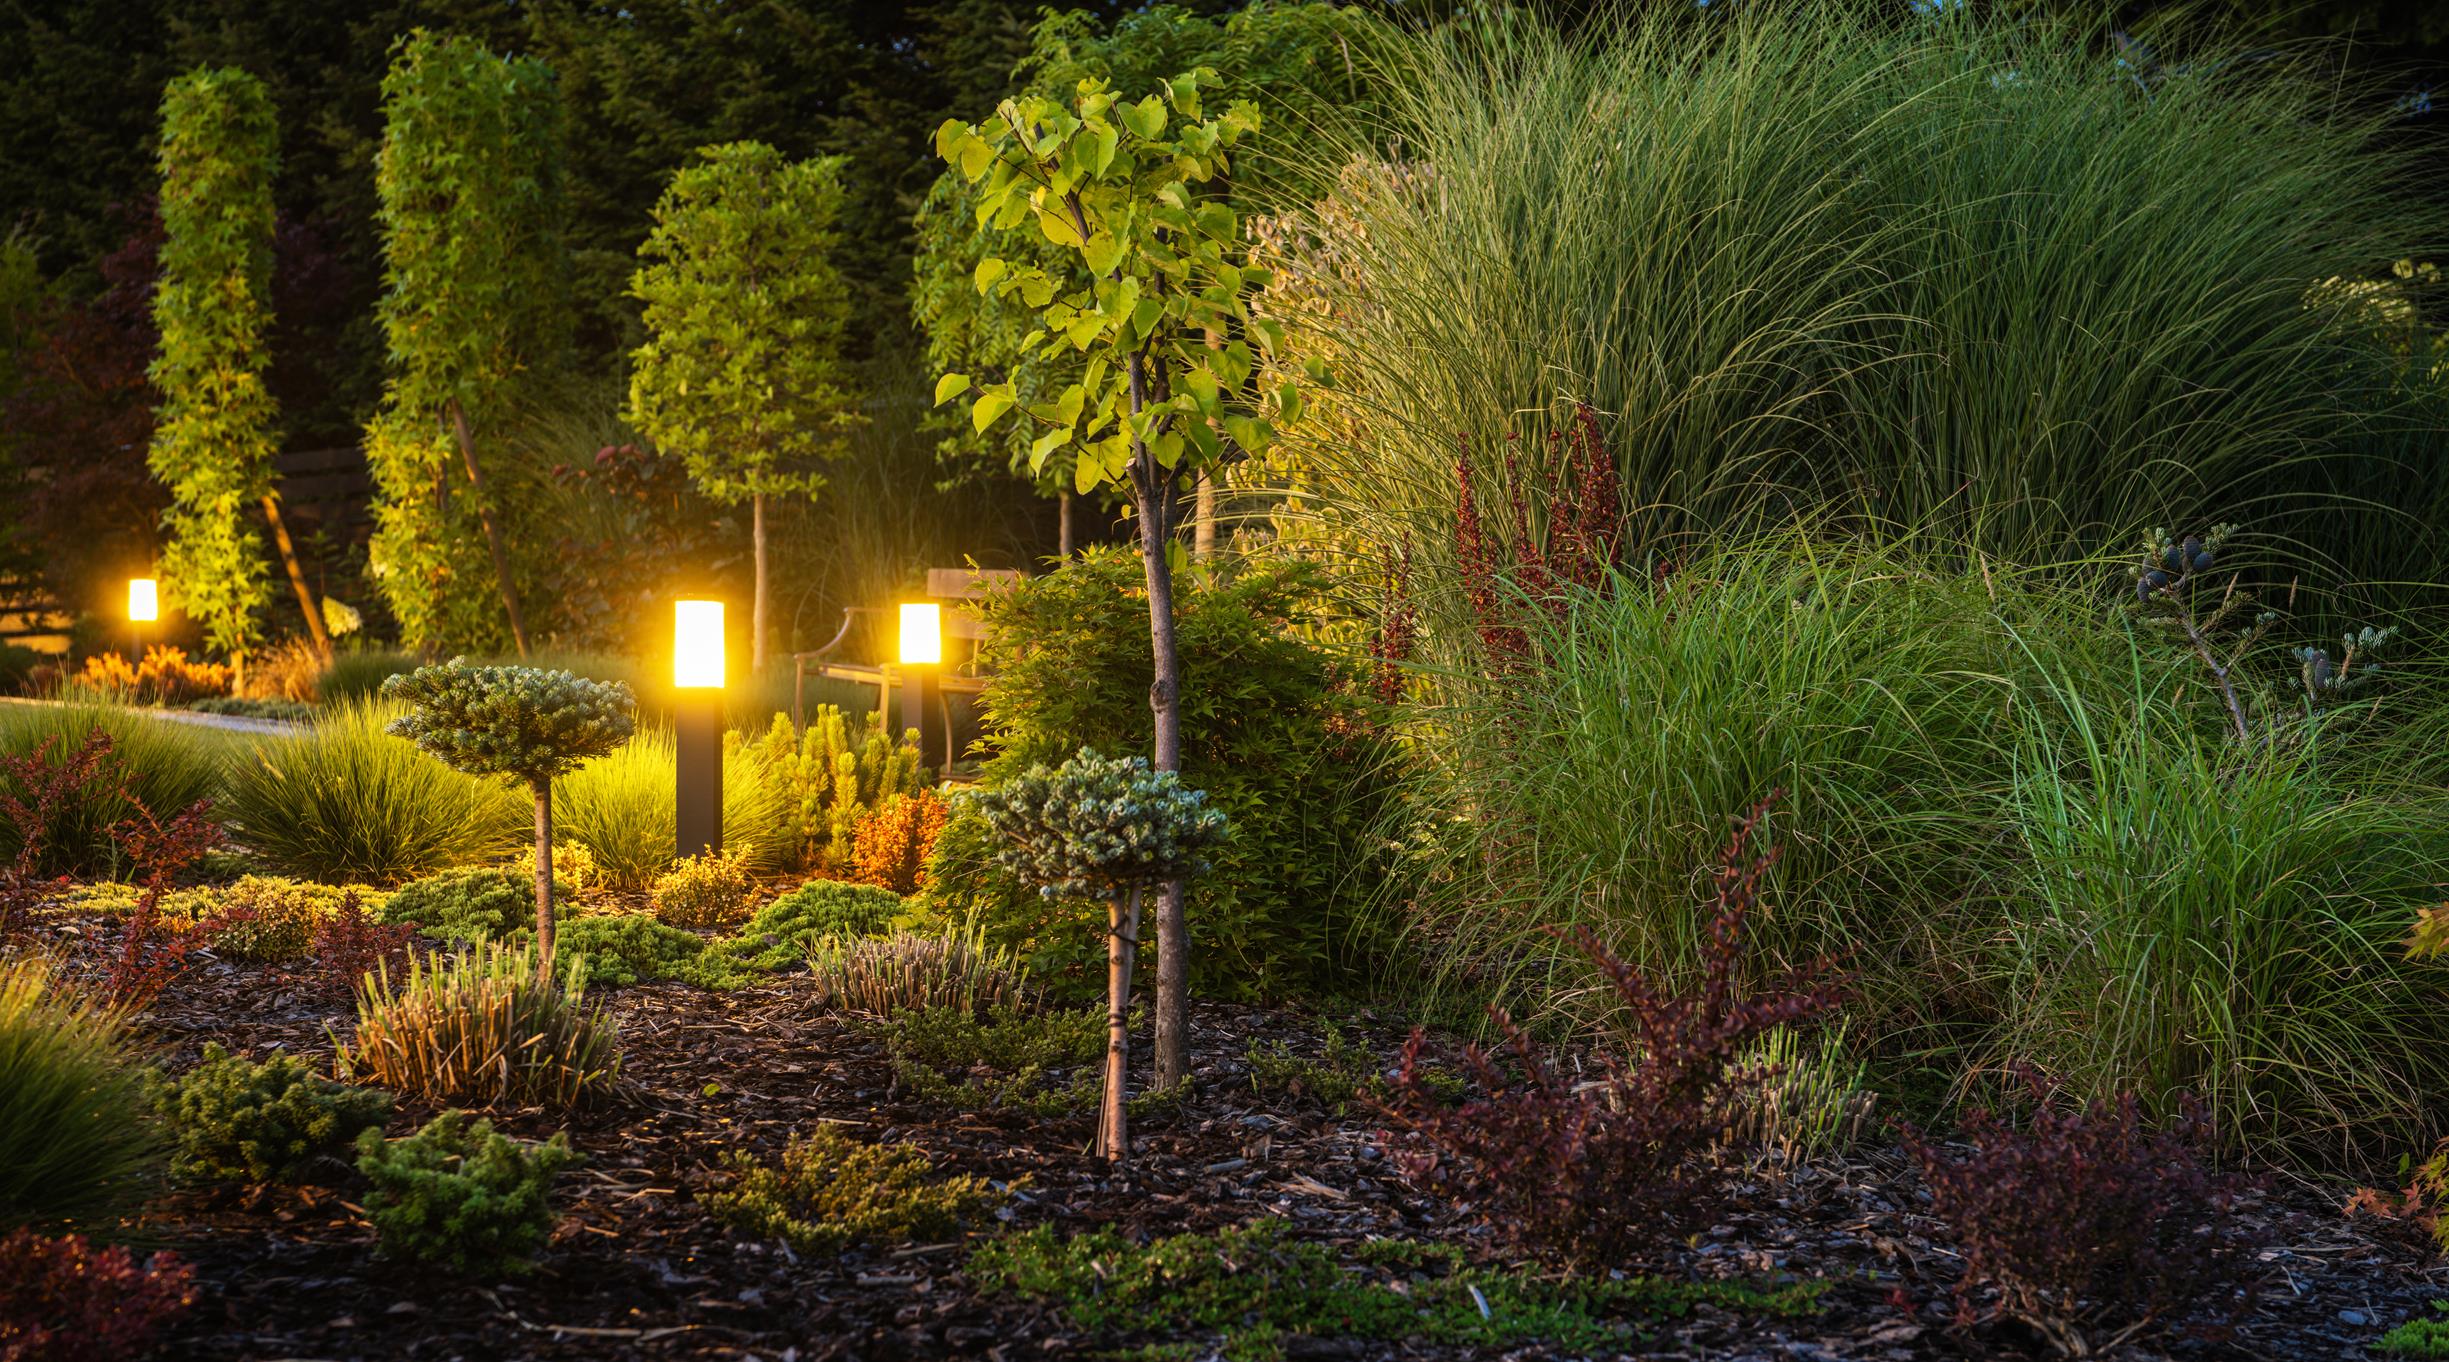 Colorful Full of Decorative Backyard Garden Illuminated by Outdoor Landscape Lighting. Night Time in a Garden.